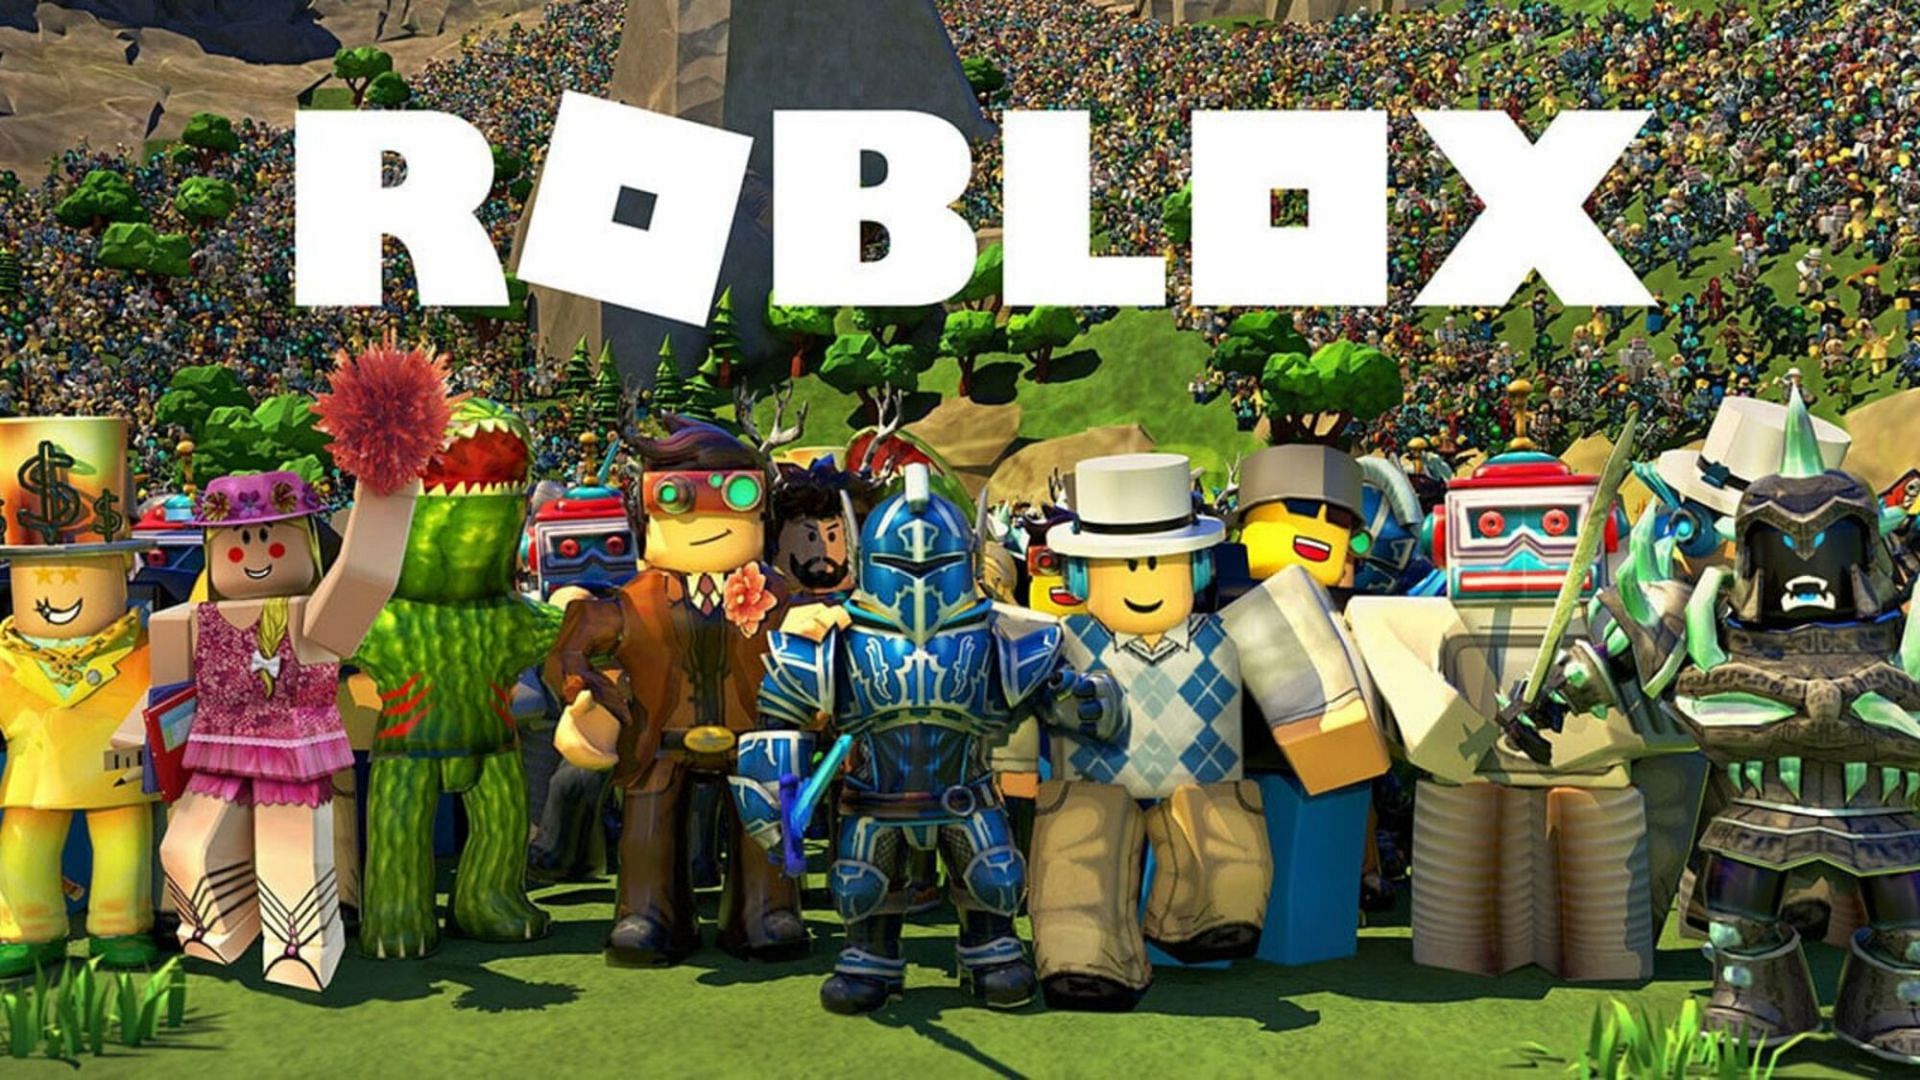 Underplayed Roblox Games (image via Roblox)